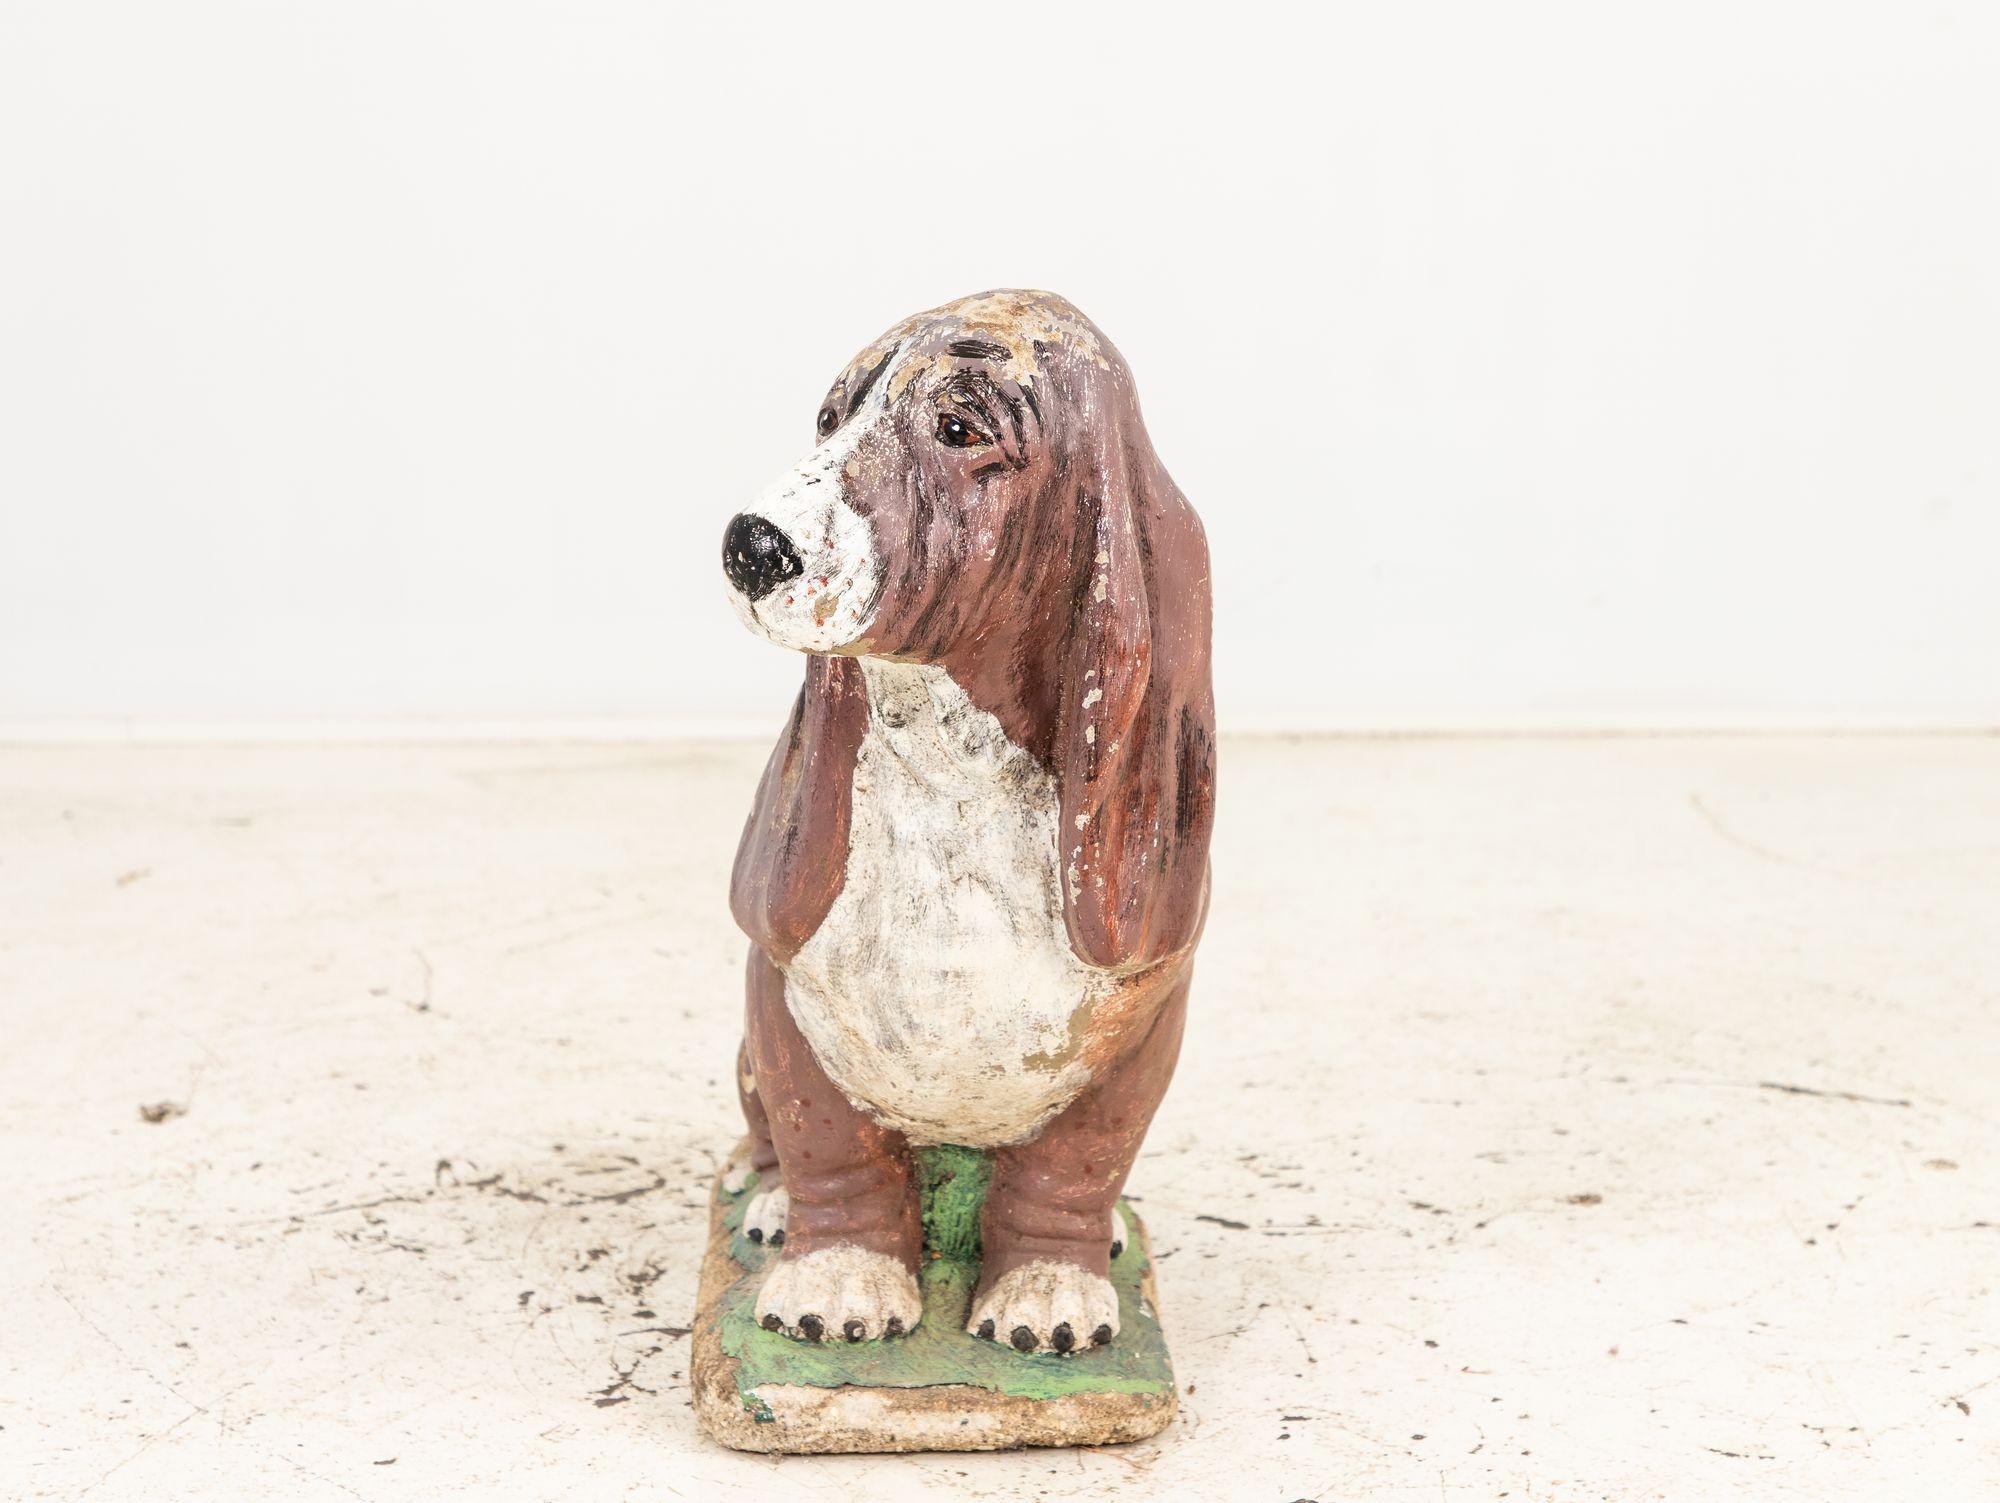 This charming hound dog garden ornament boasts a captivating patina that has gracefully aged over time retaining some paint. Despite minor imperfections, it holds its original form beautifully. The enchanting patina has added charming green accents